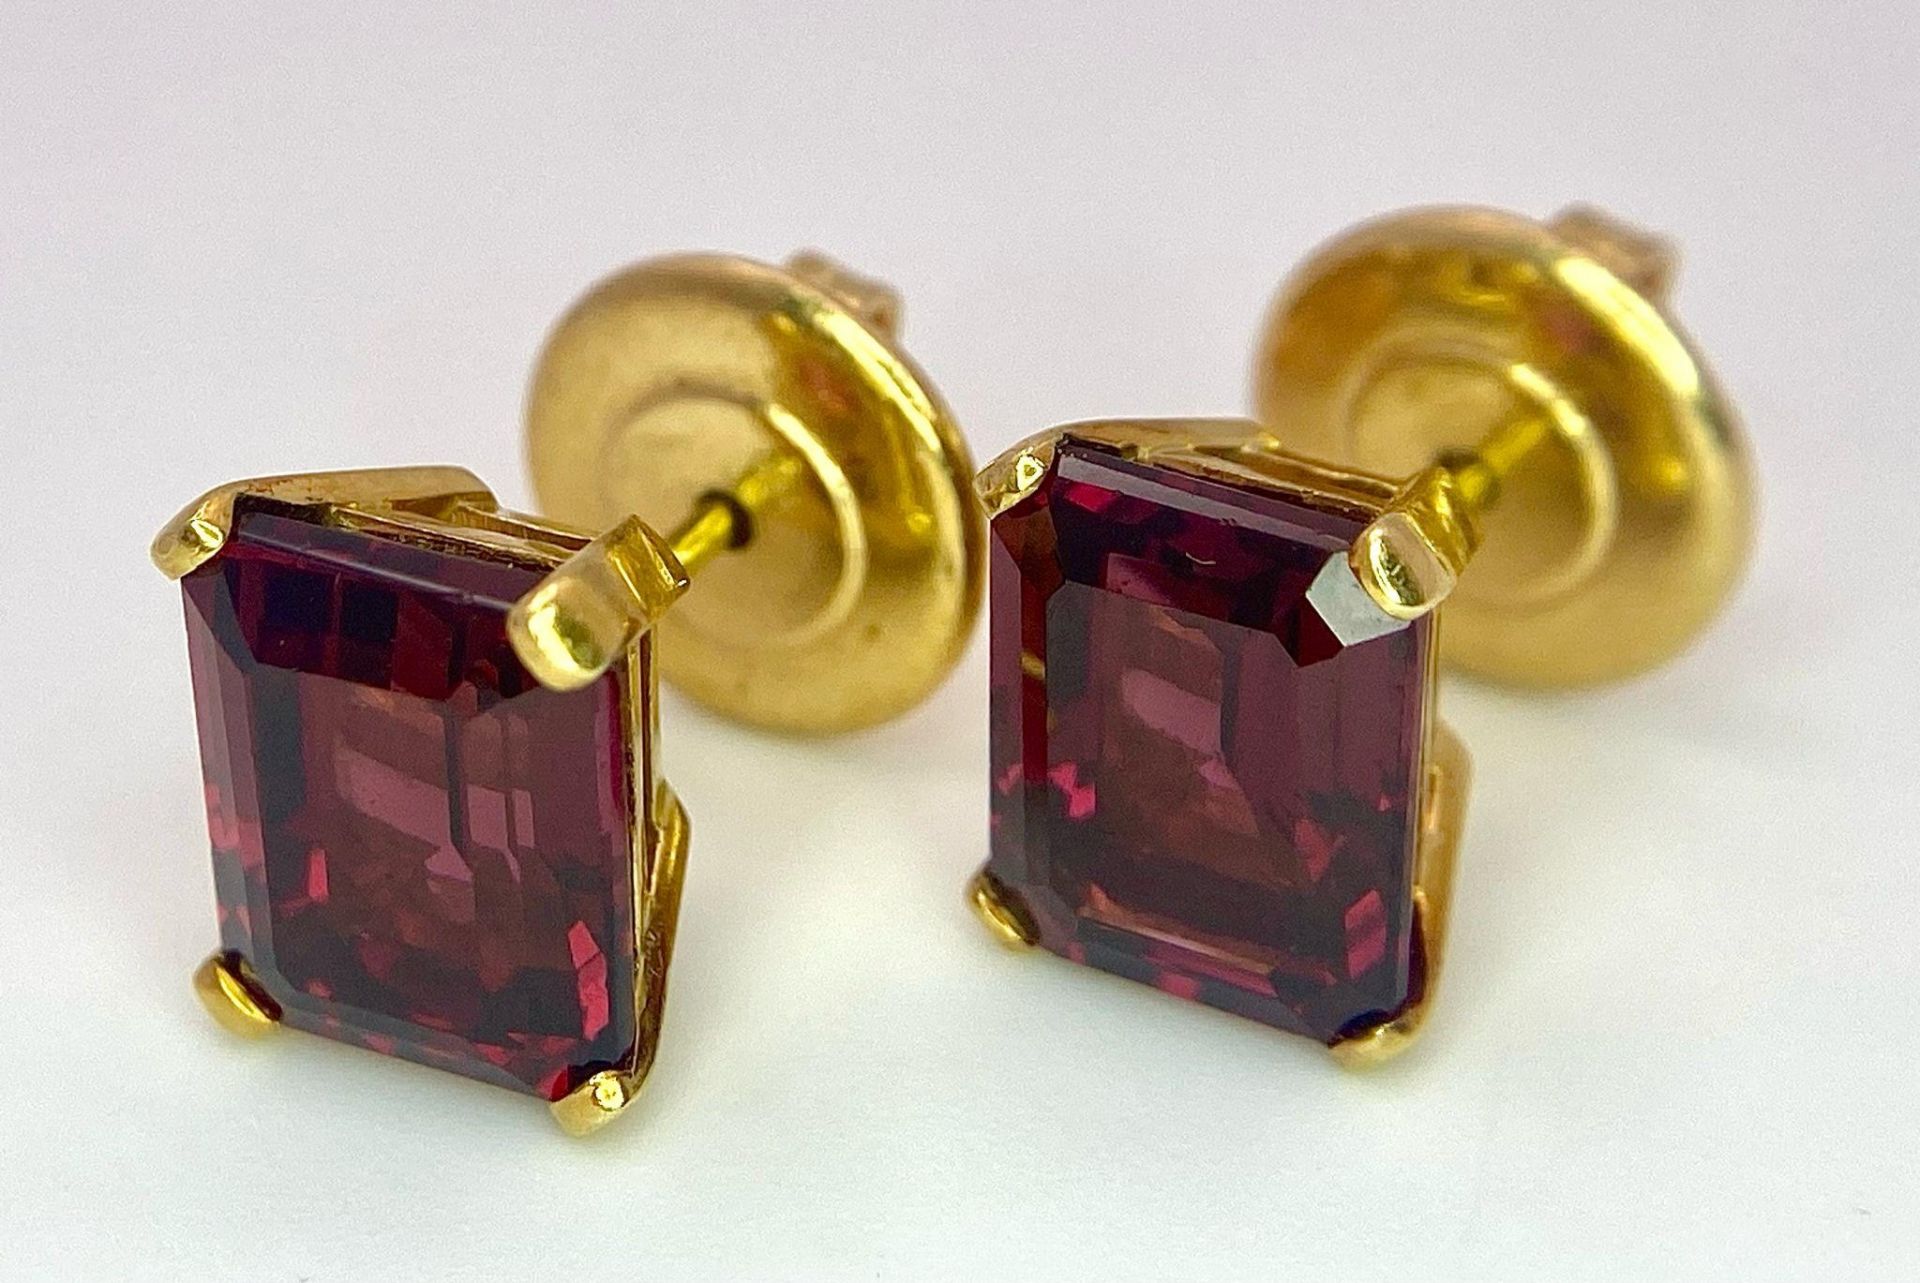 A Pair of 18K Yellow Gold and Alexandrite Earrings. Emerald cut alexandrite - 5ctw. 5.7g total - Image 2 of 8